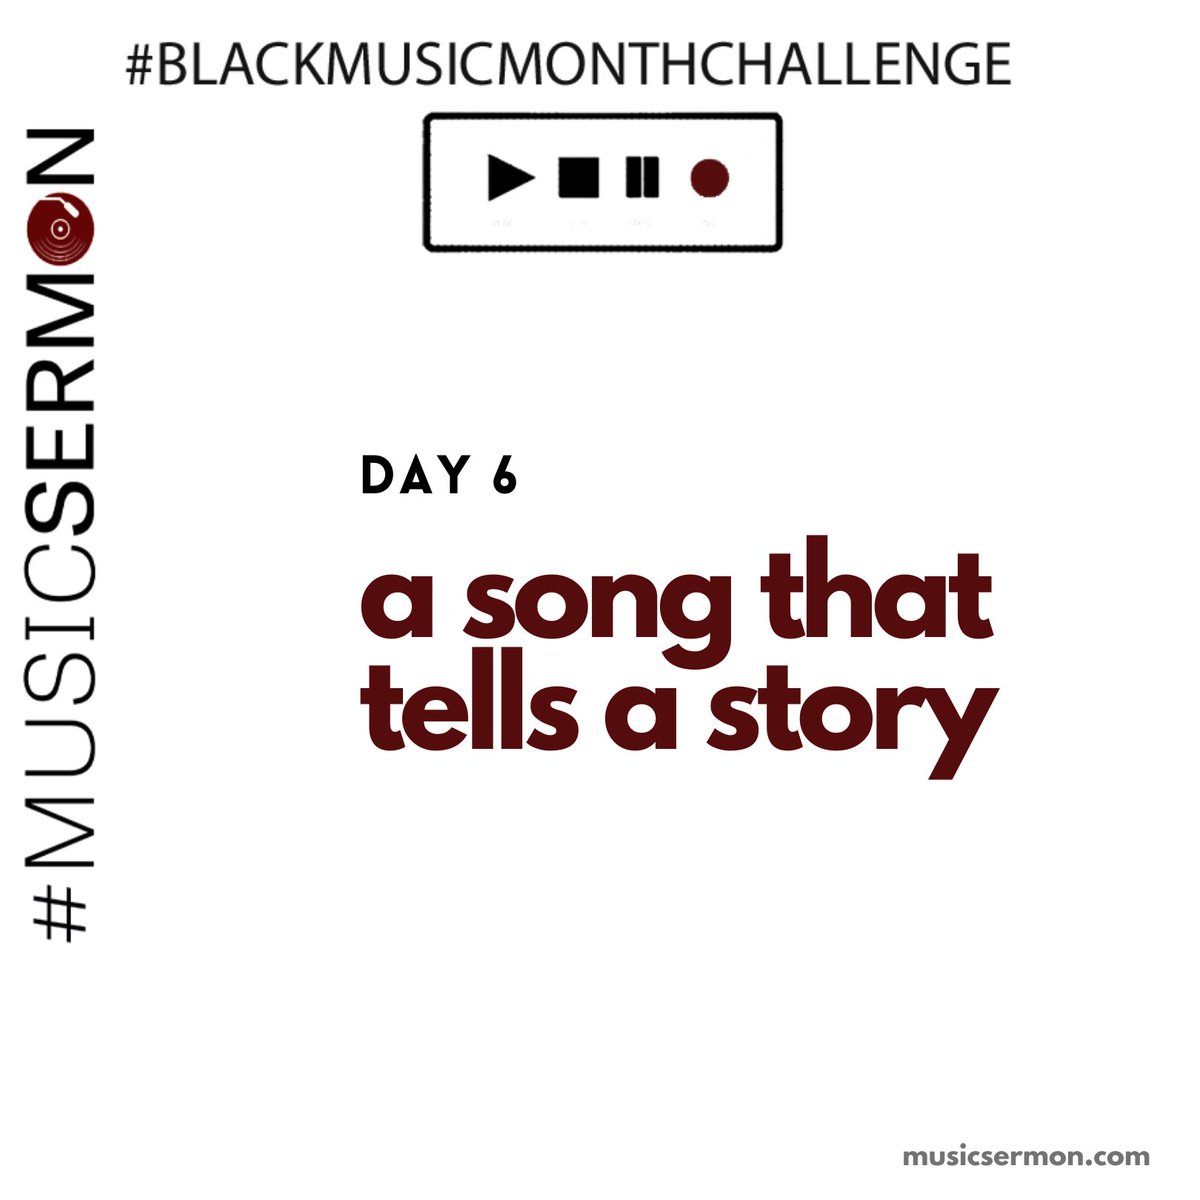 Jermaine Dupri and Dallas Austin talked during their “I Wrote That Song” IG Live about thinking of songs as mini-movies. The best ones weave a complete tale in those 3+ minutes. For Day 6 of the  #BlackMusicMonthChallenge, share your favorite song that tells a story.